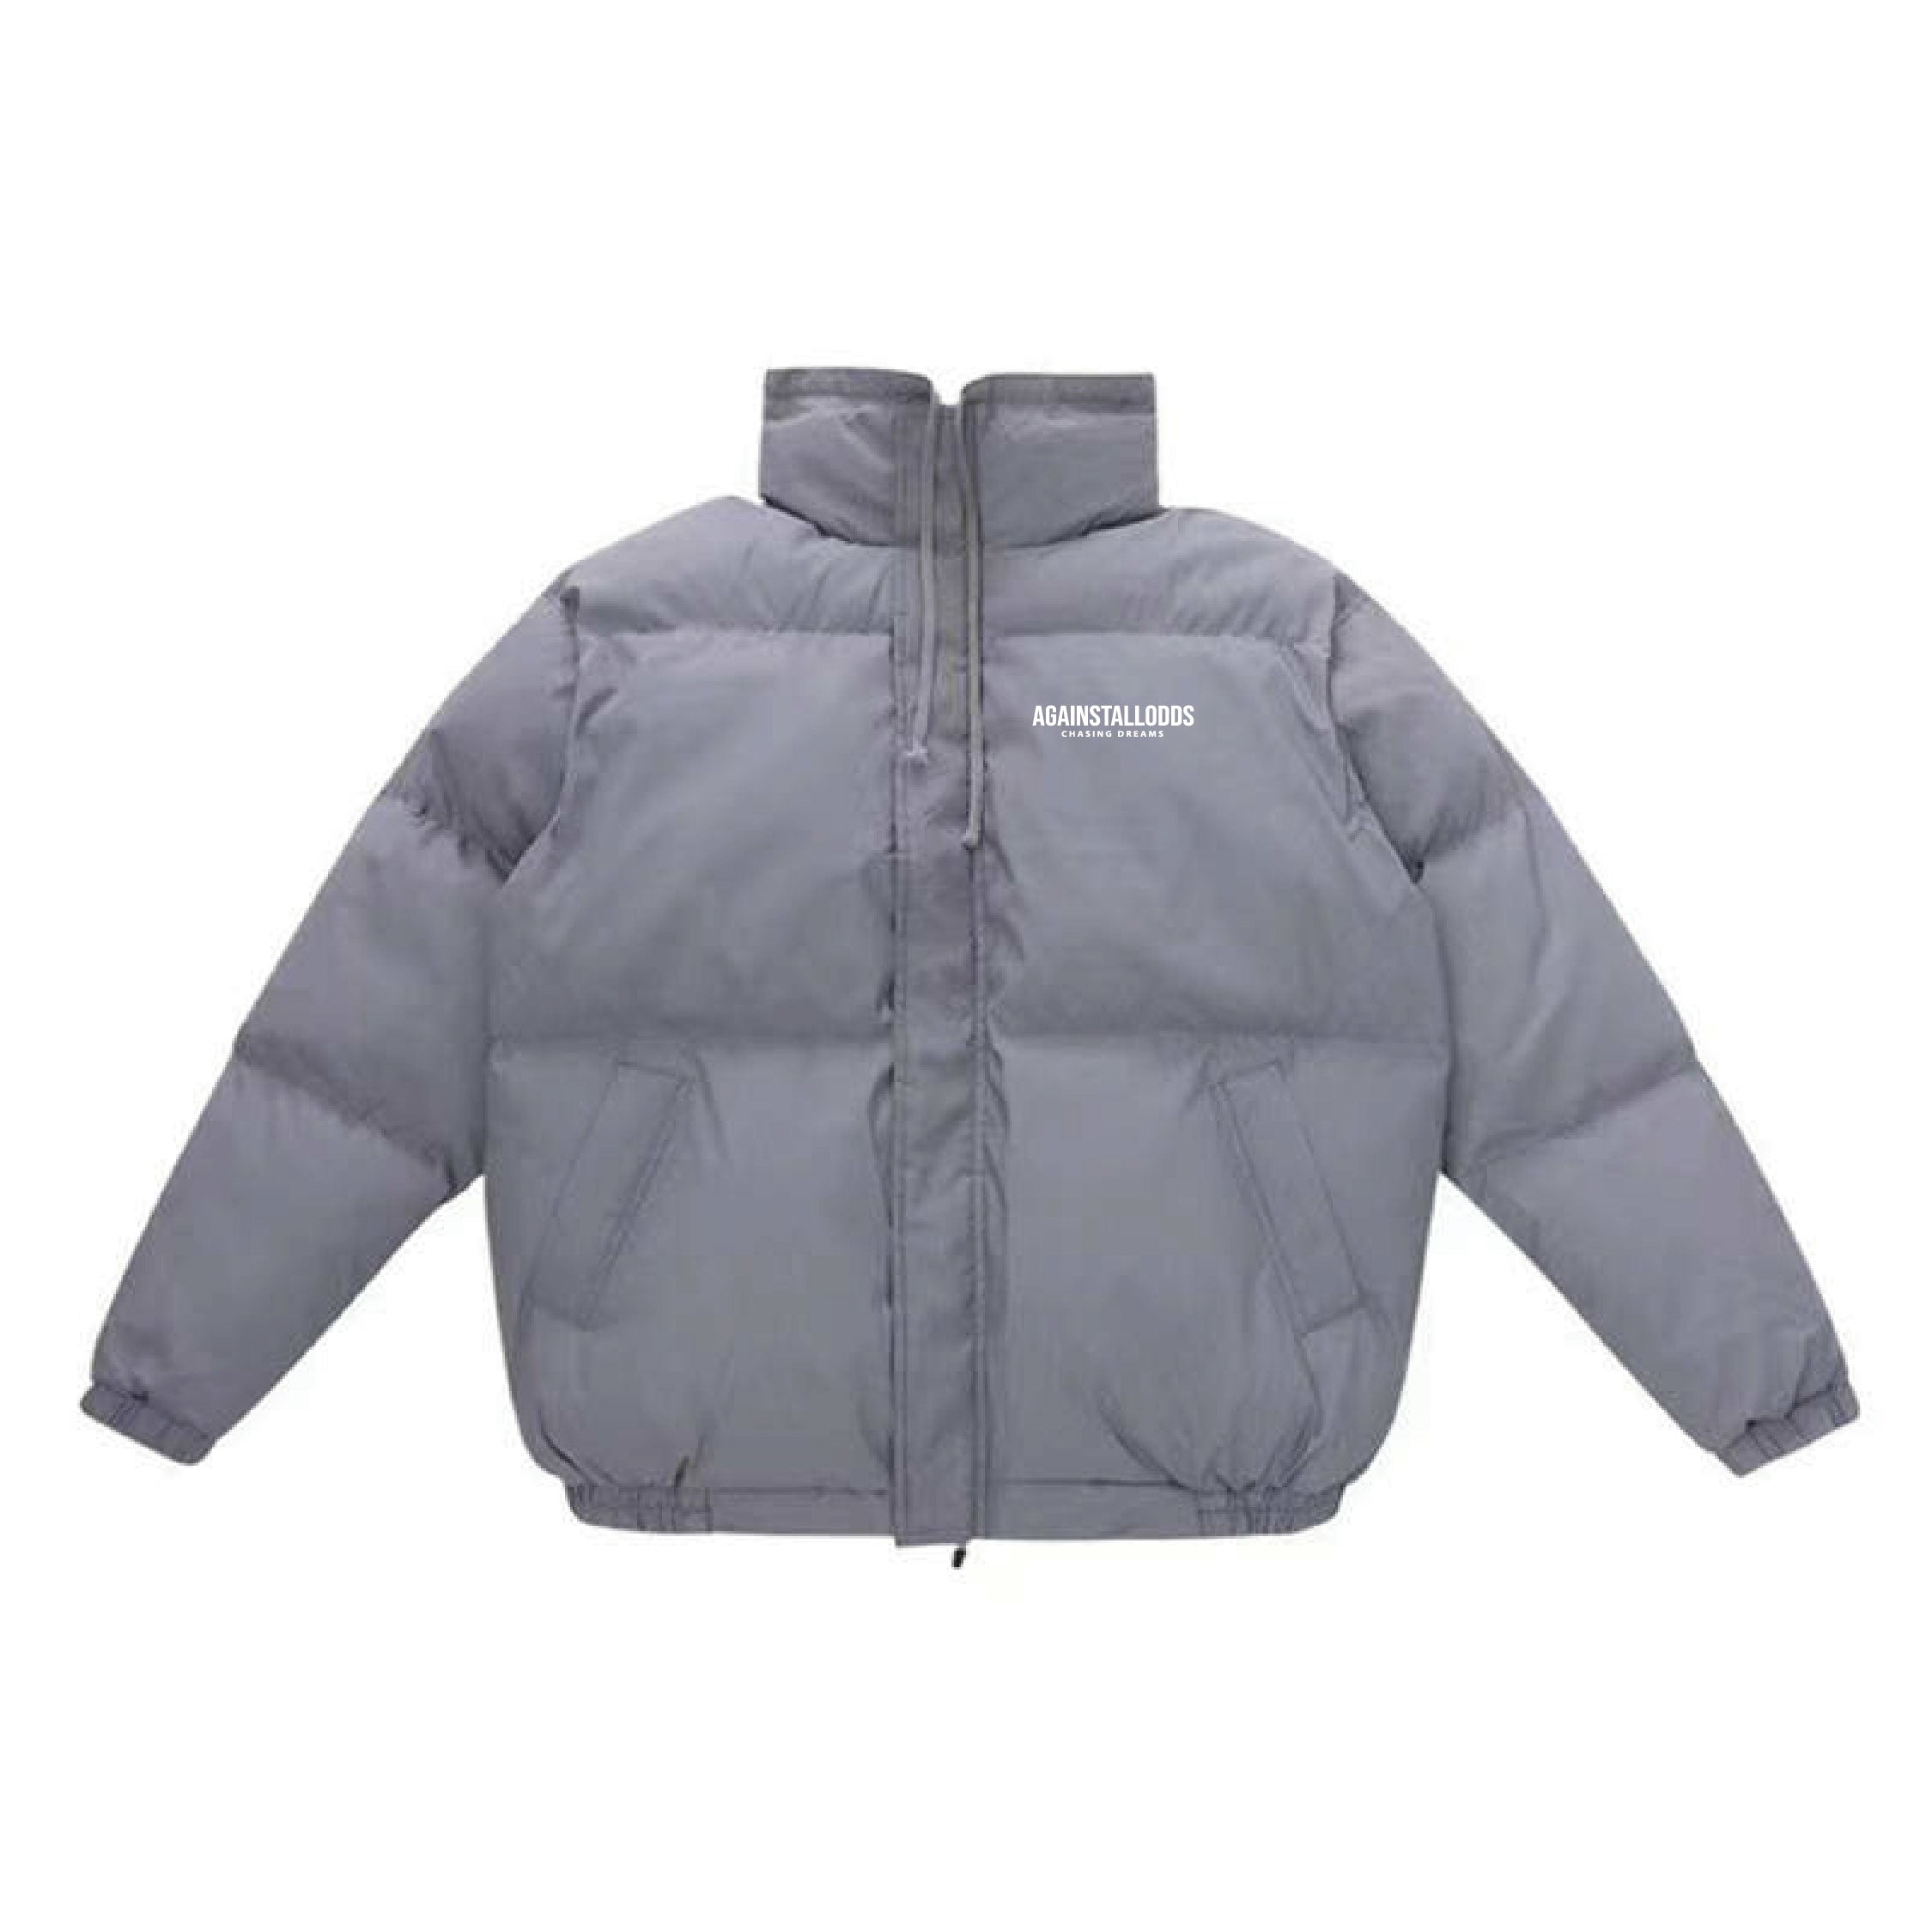 THE DREAMERS WINTER PUFFER JACKET - Reflective